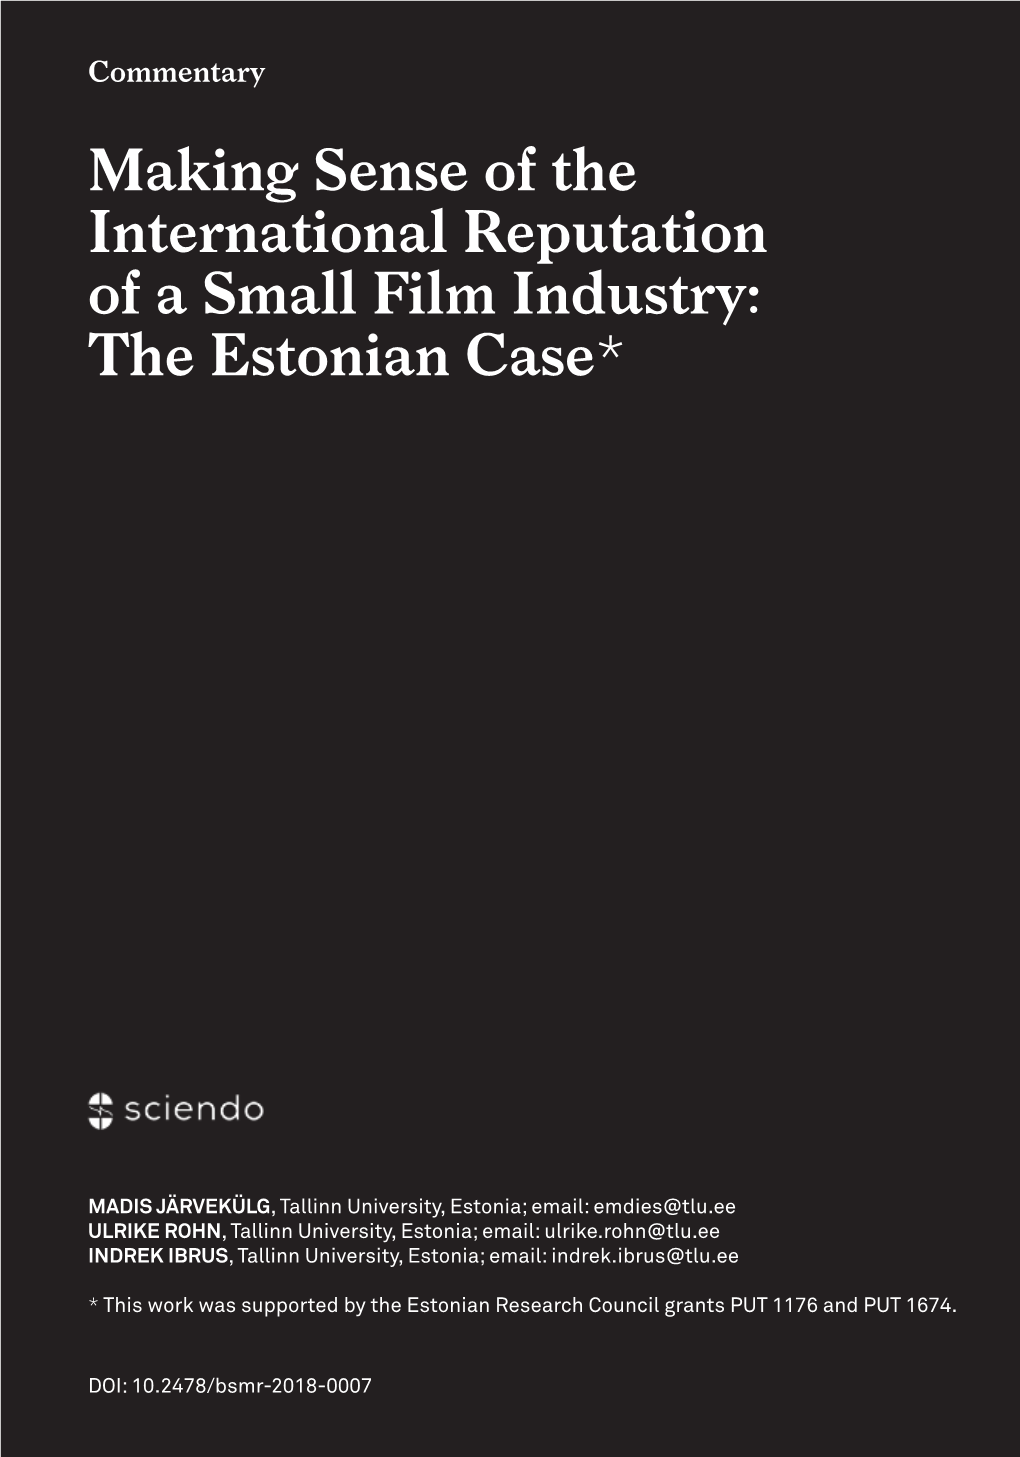 Making Sense of the International Reputation of a Small Film Industry: the Estonian Case*